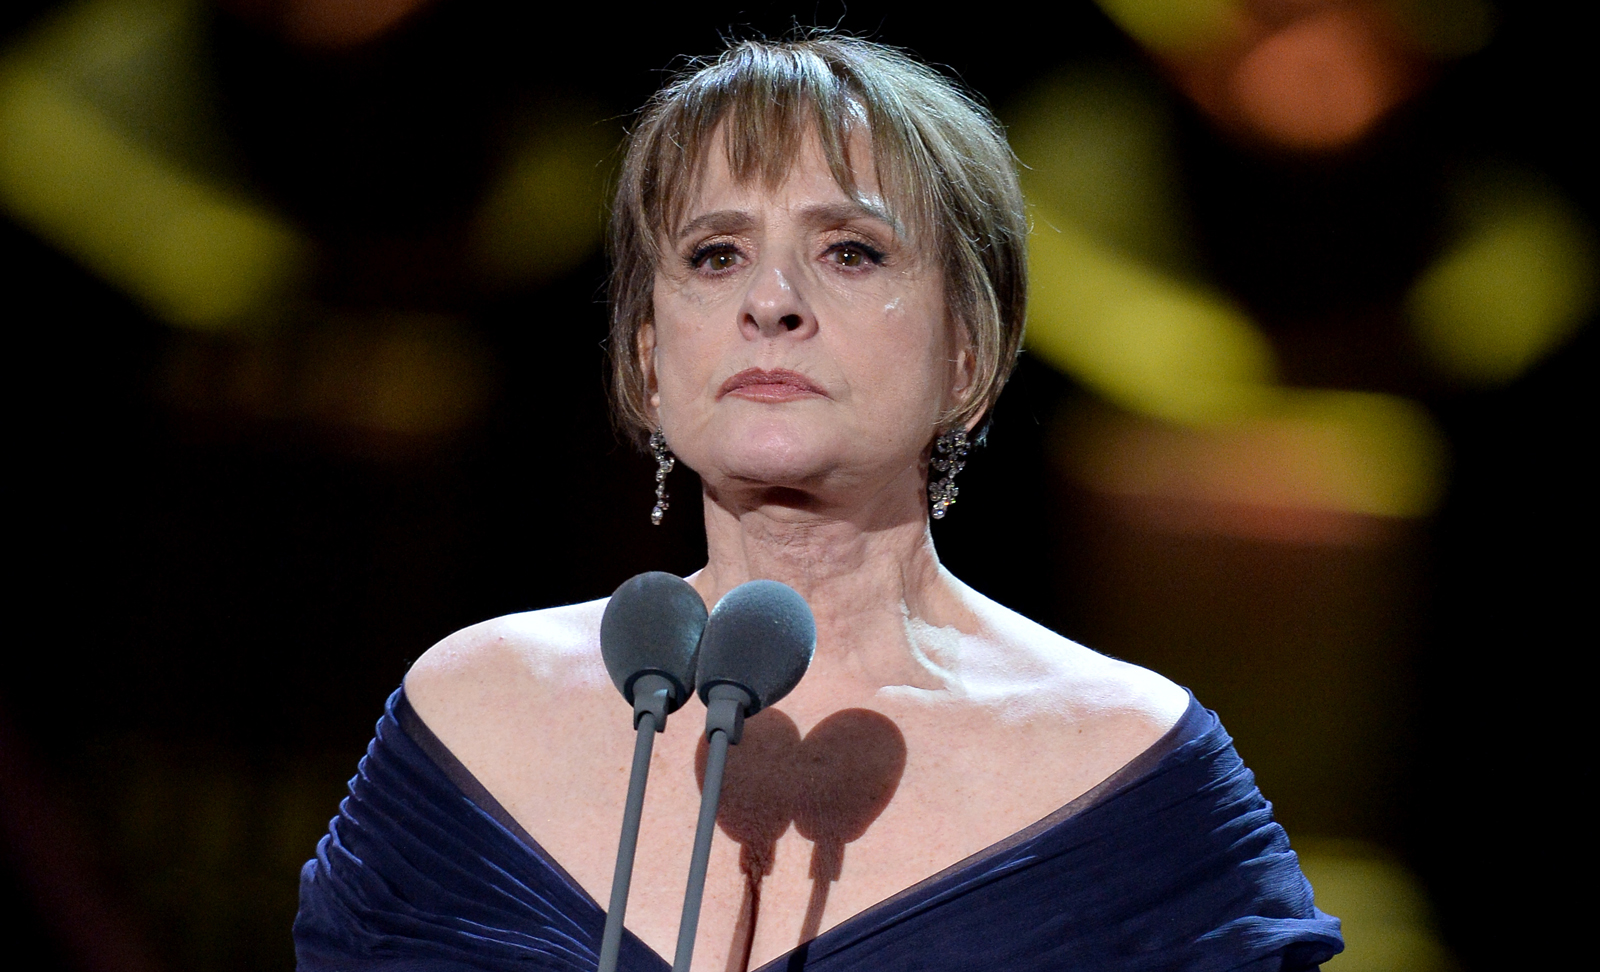 Patti lupone of pictures Patti LuPone: